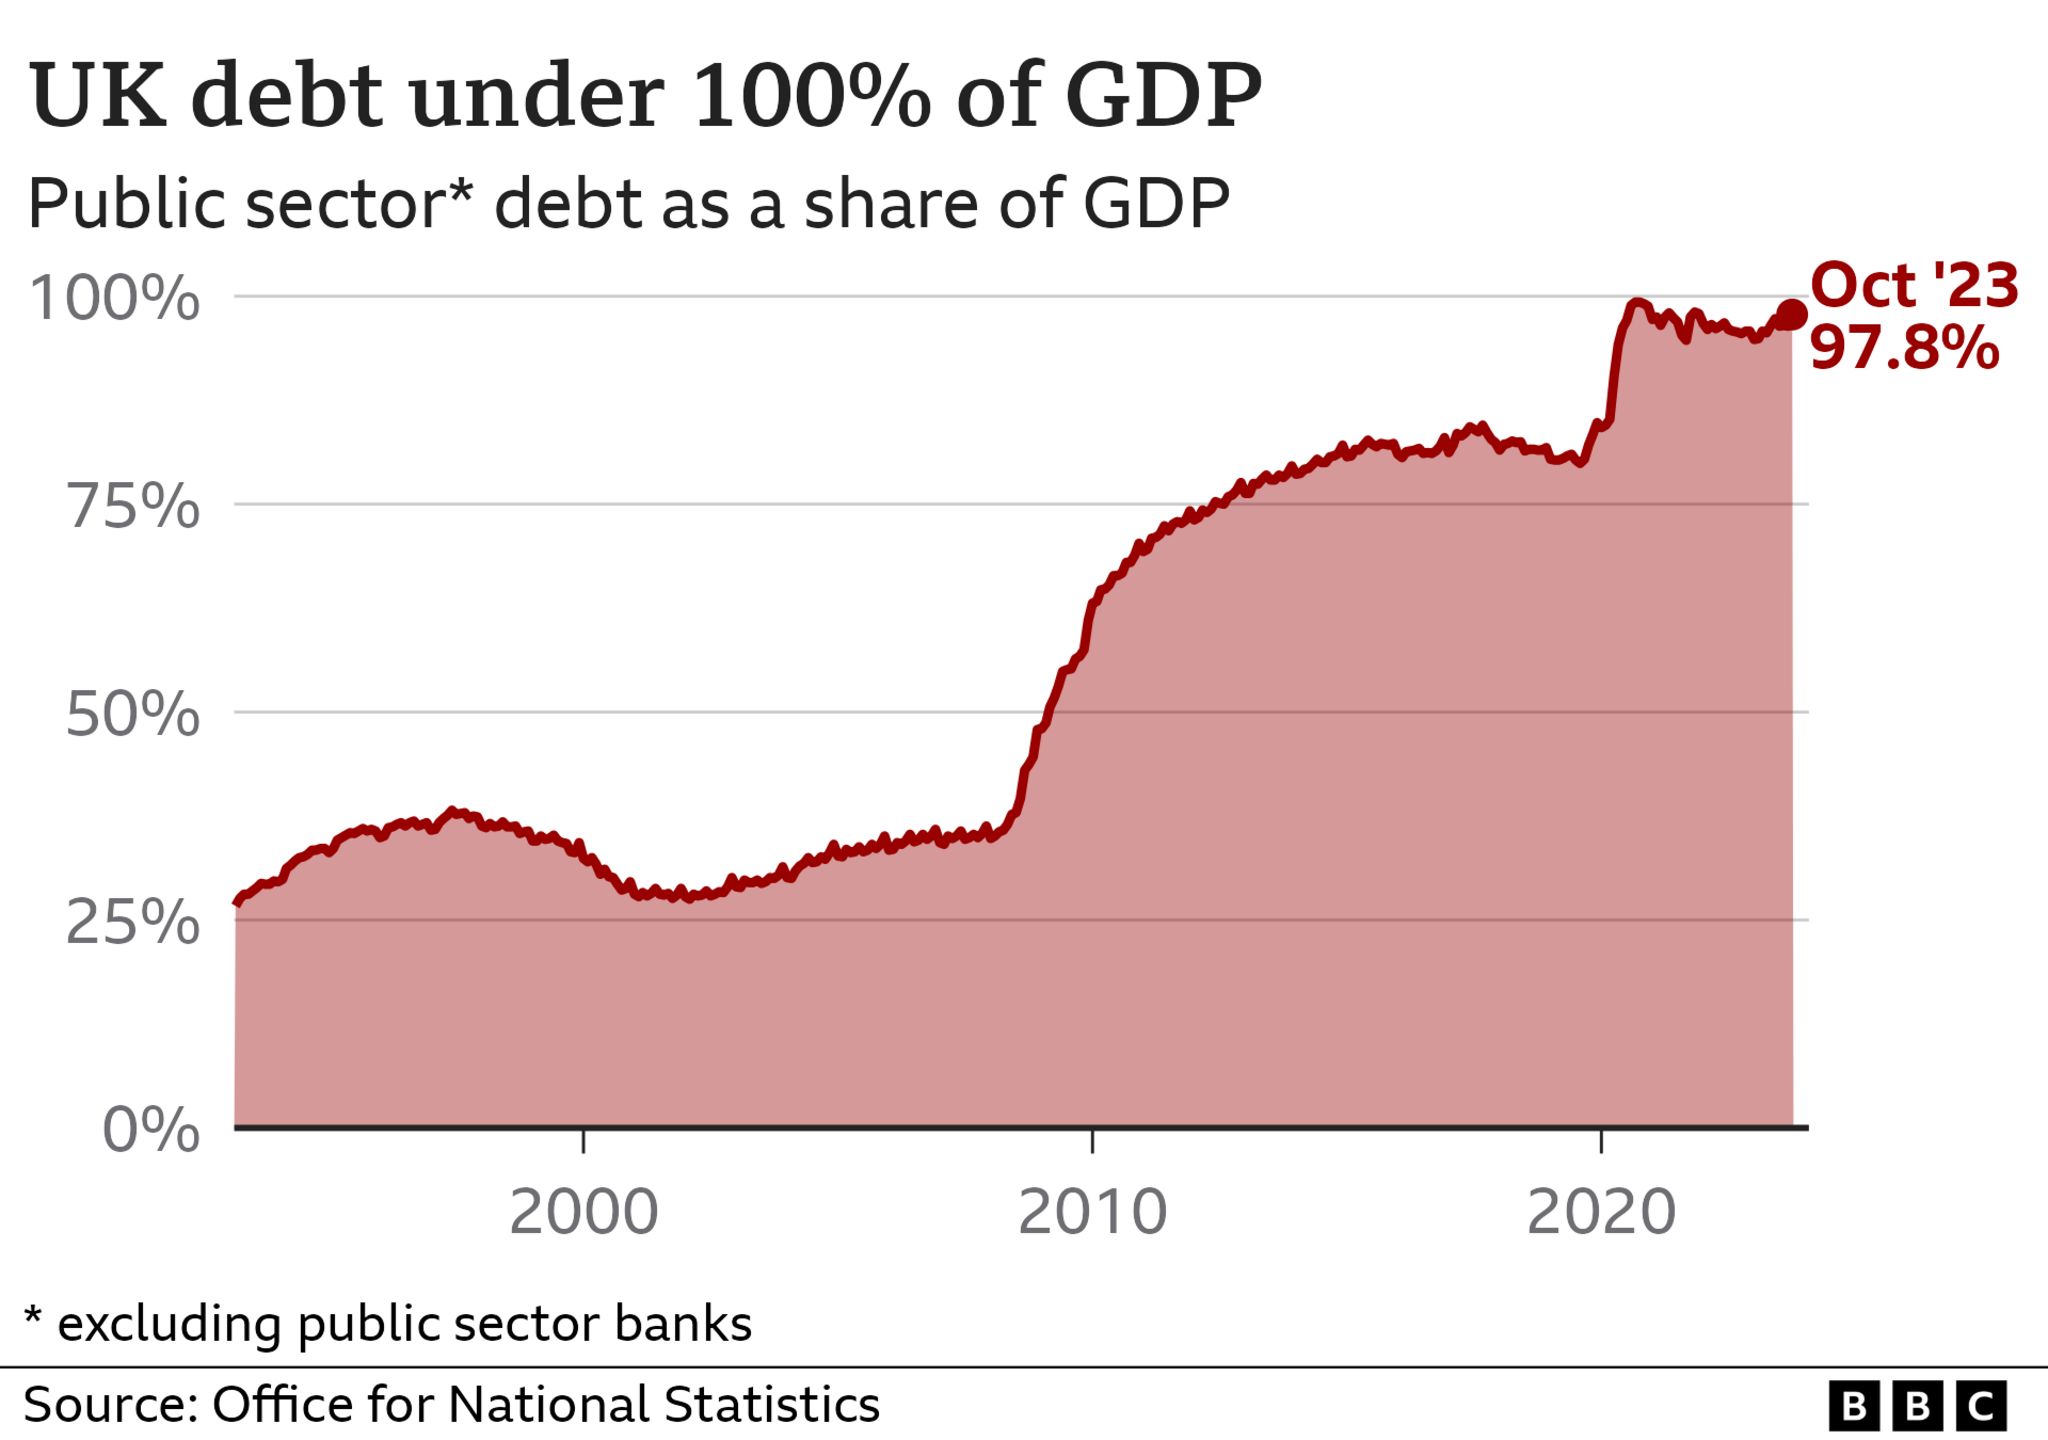 Line chart showing the public sector debt, excluding public banks, as a percentage of GDP. It has been steadily rising since 2010, with the figure reaching 97.8% in October 2023.